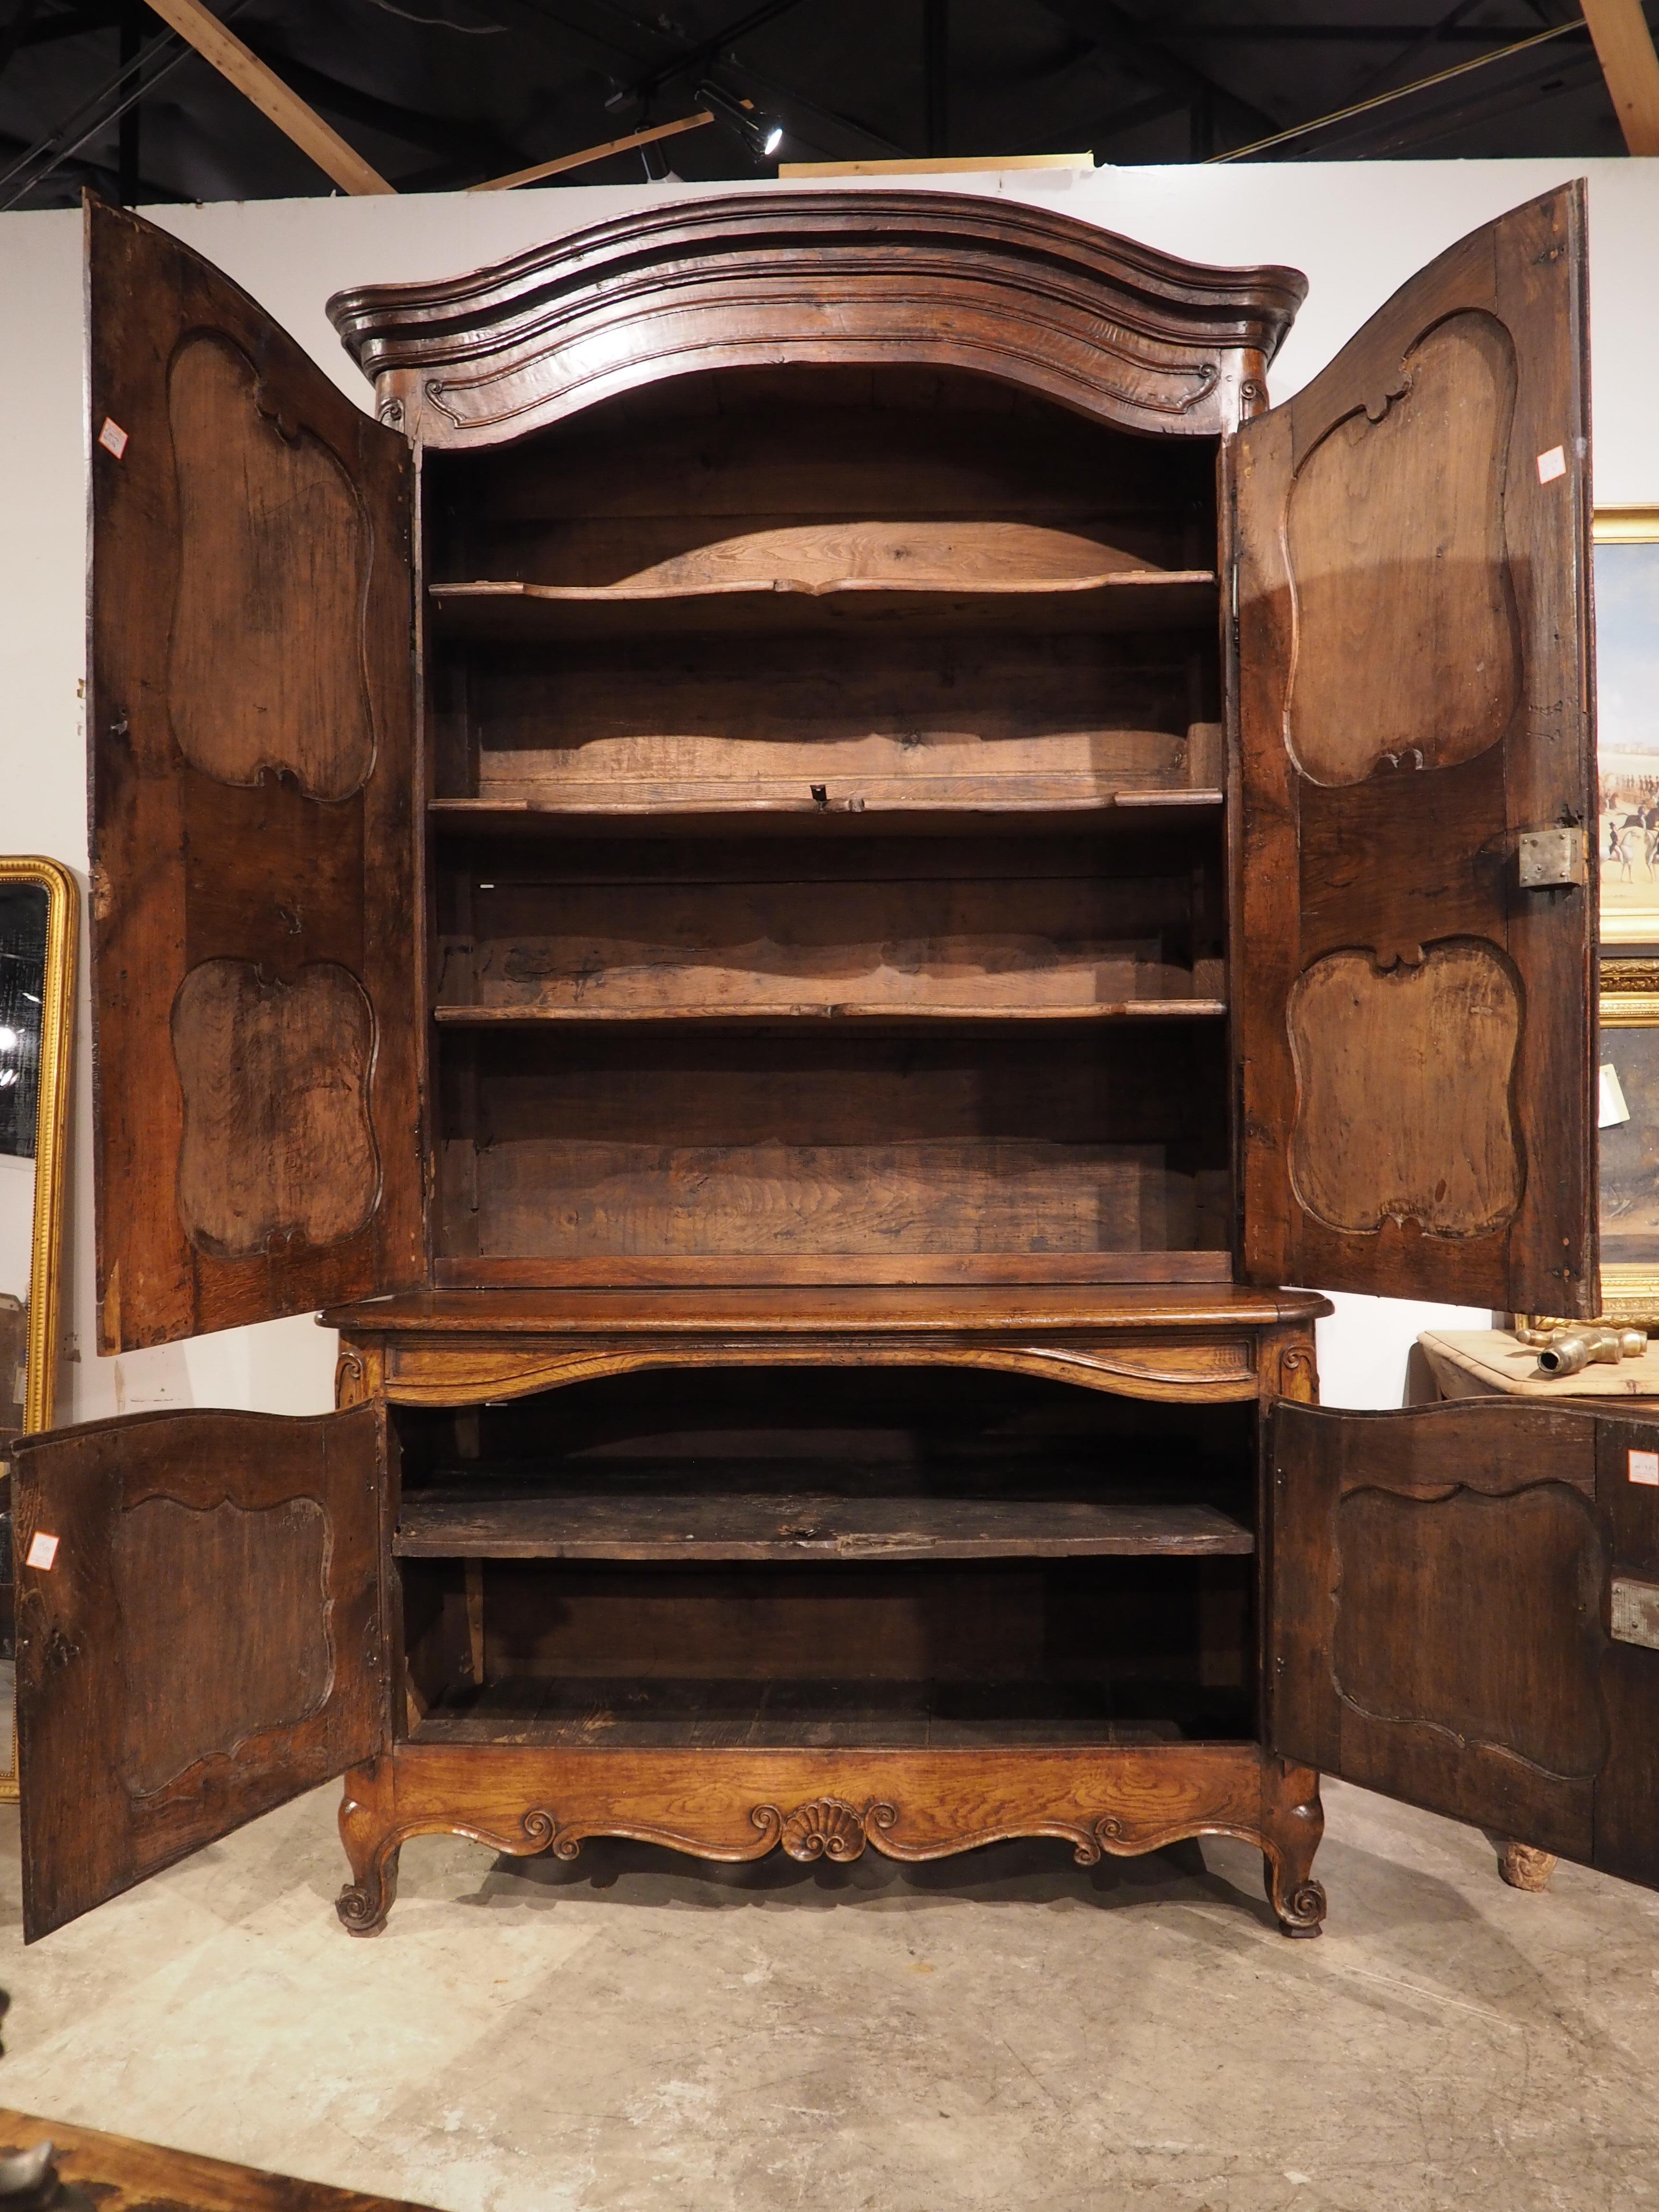 Louis XV A Grand 18th Century French Oak Buffet Deux Corps from the Perche Region For Sale